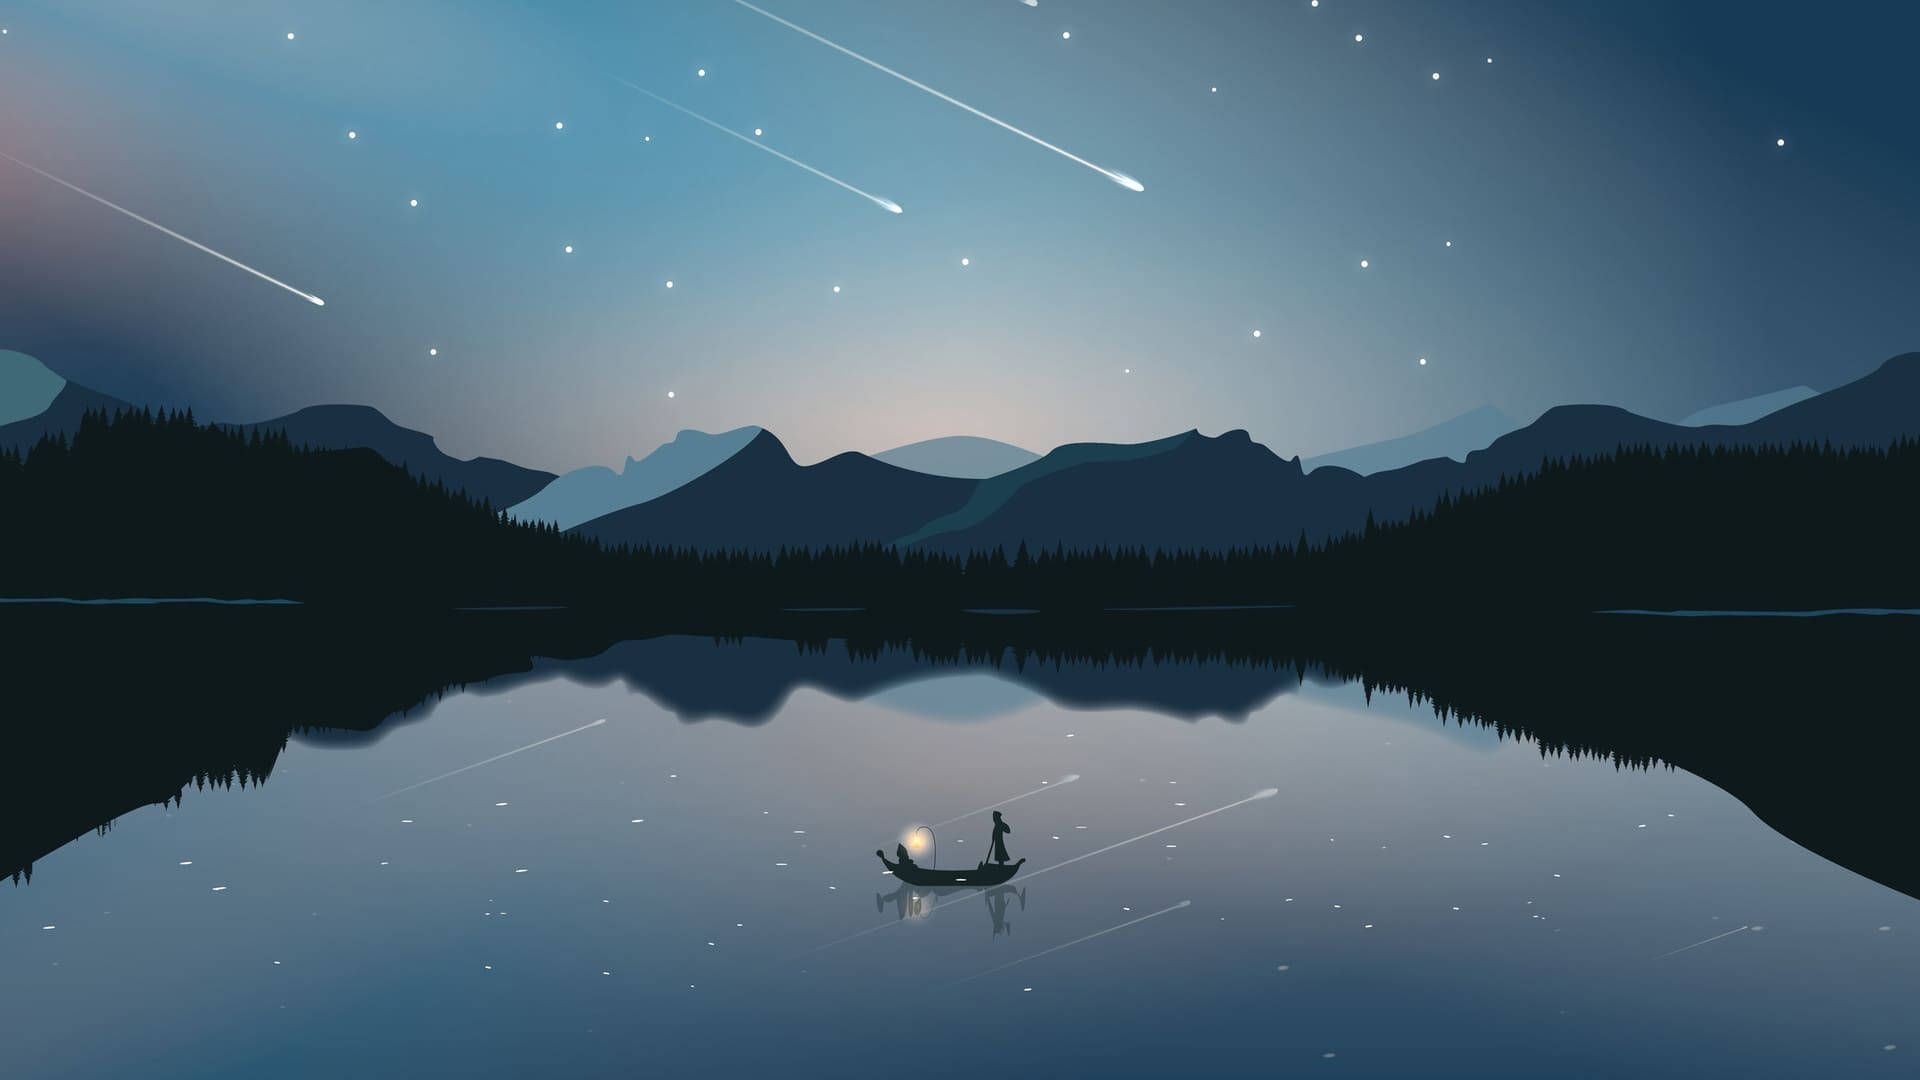 Person in a boat on a lake at night - Desktop, computer, lake